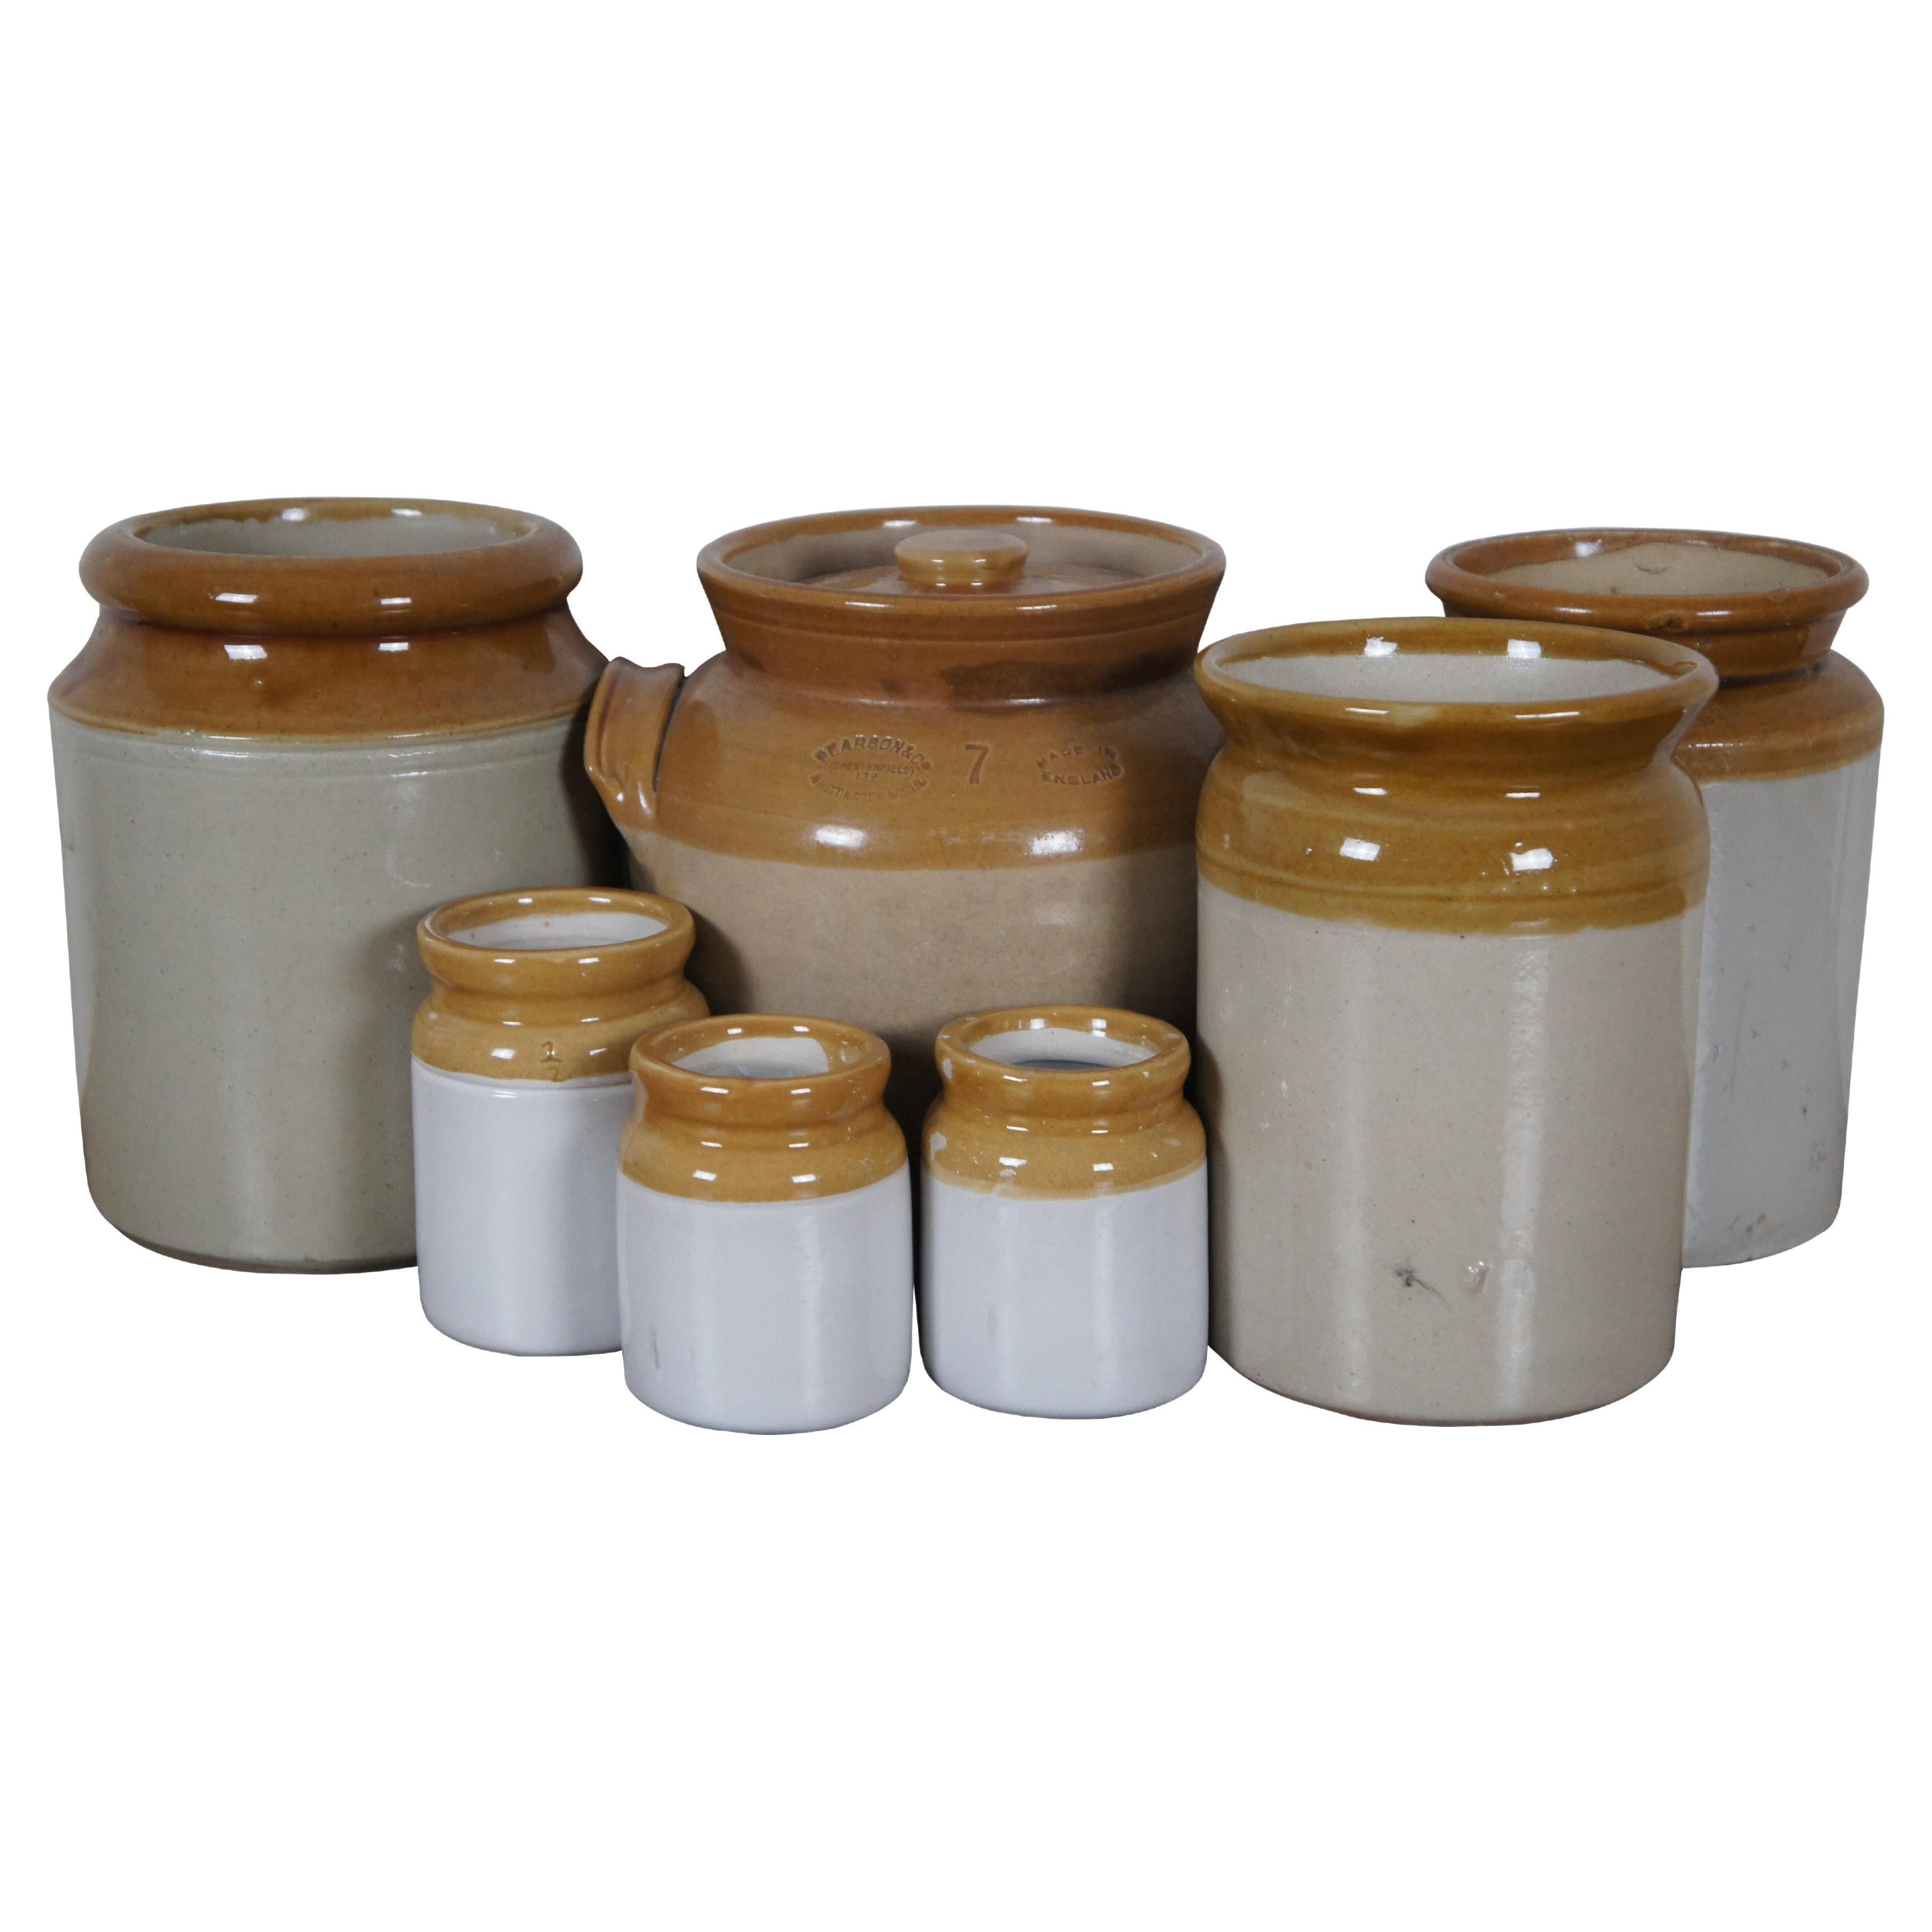 7 Pcs Pearson & Co Chesterfield English Stoneware Crocks Cannister Biscuit Jar For Sale